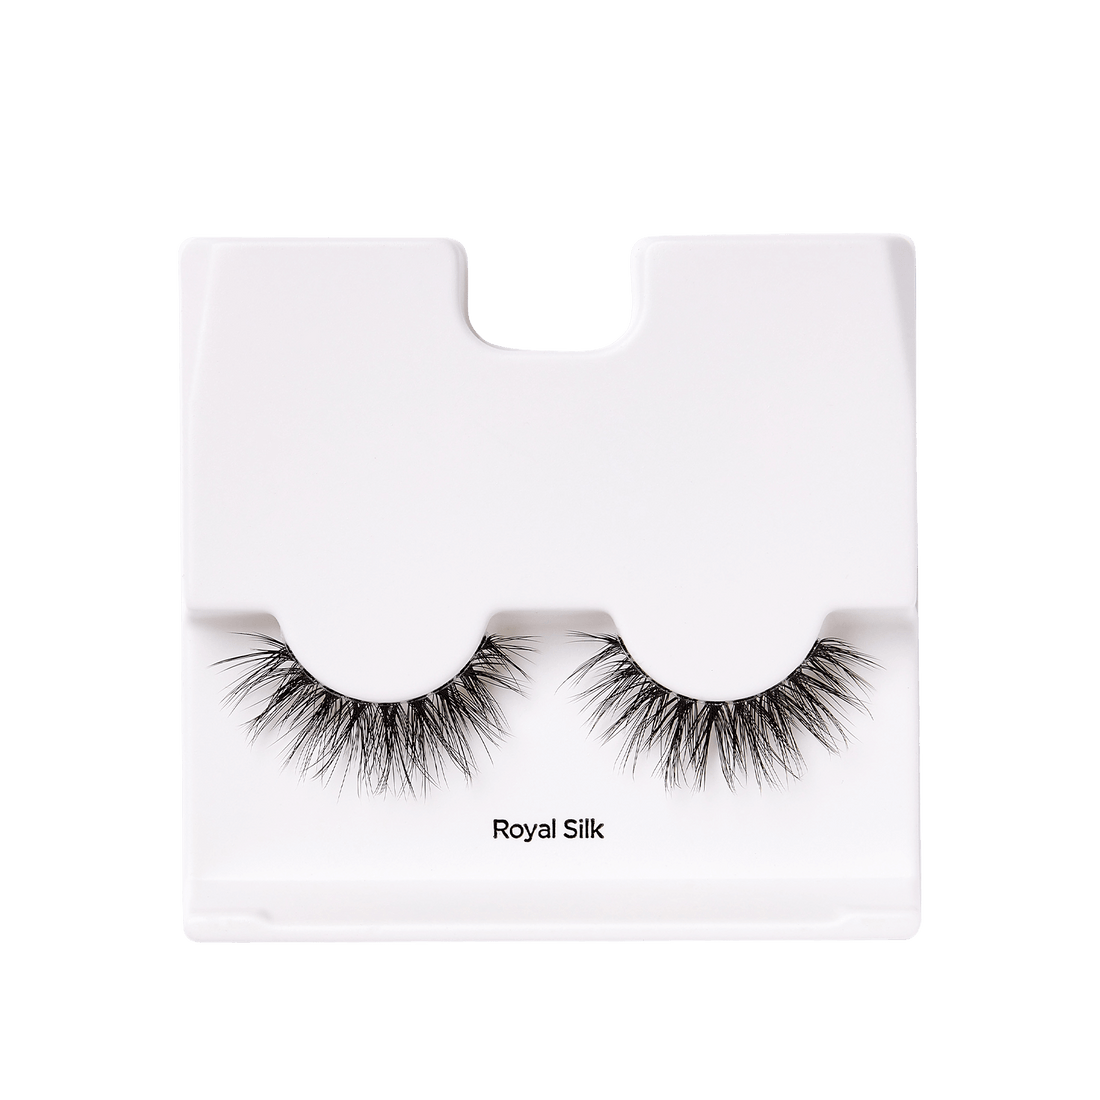 KISS Lash Couture LuXtensions Collection False Eyelashes, ‘Royal Silk’ - 1 Pair